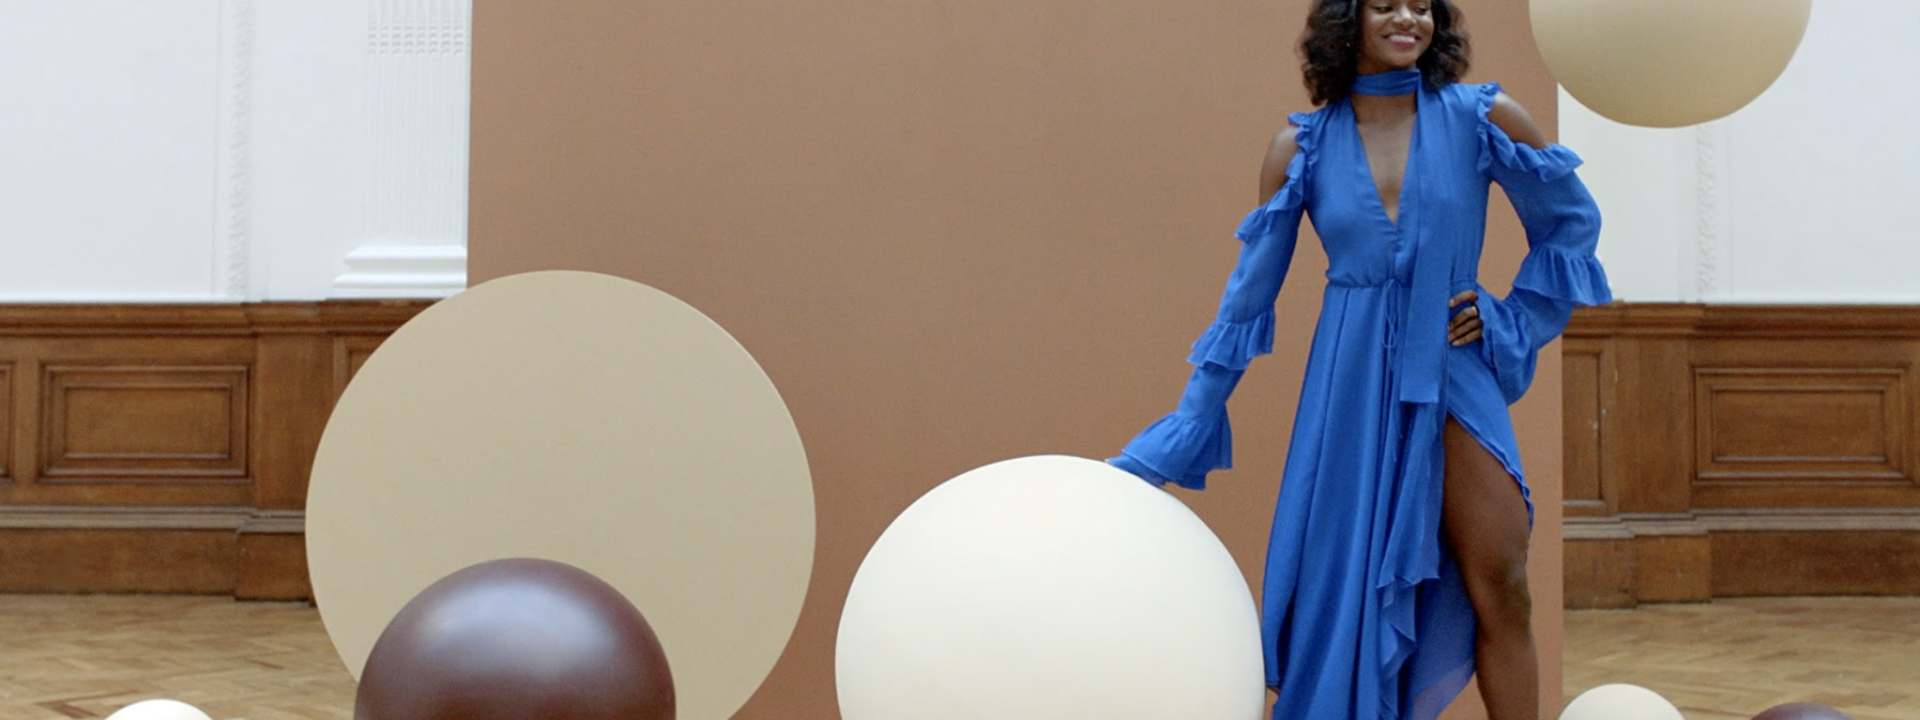 A woman in a blue dress surrounded by giant chocolate and white chocolate covered balls